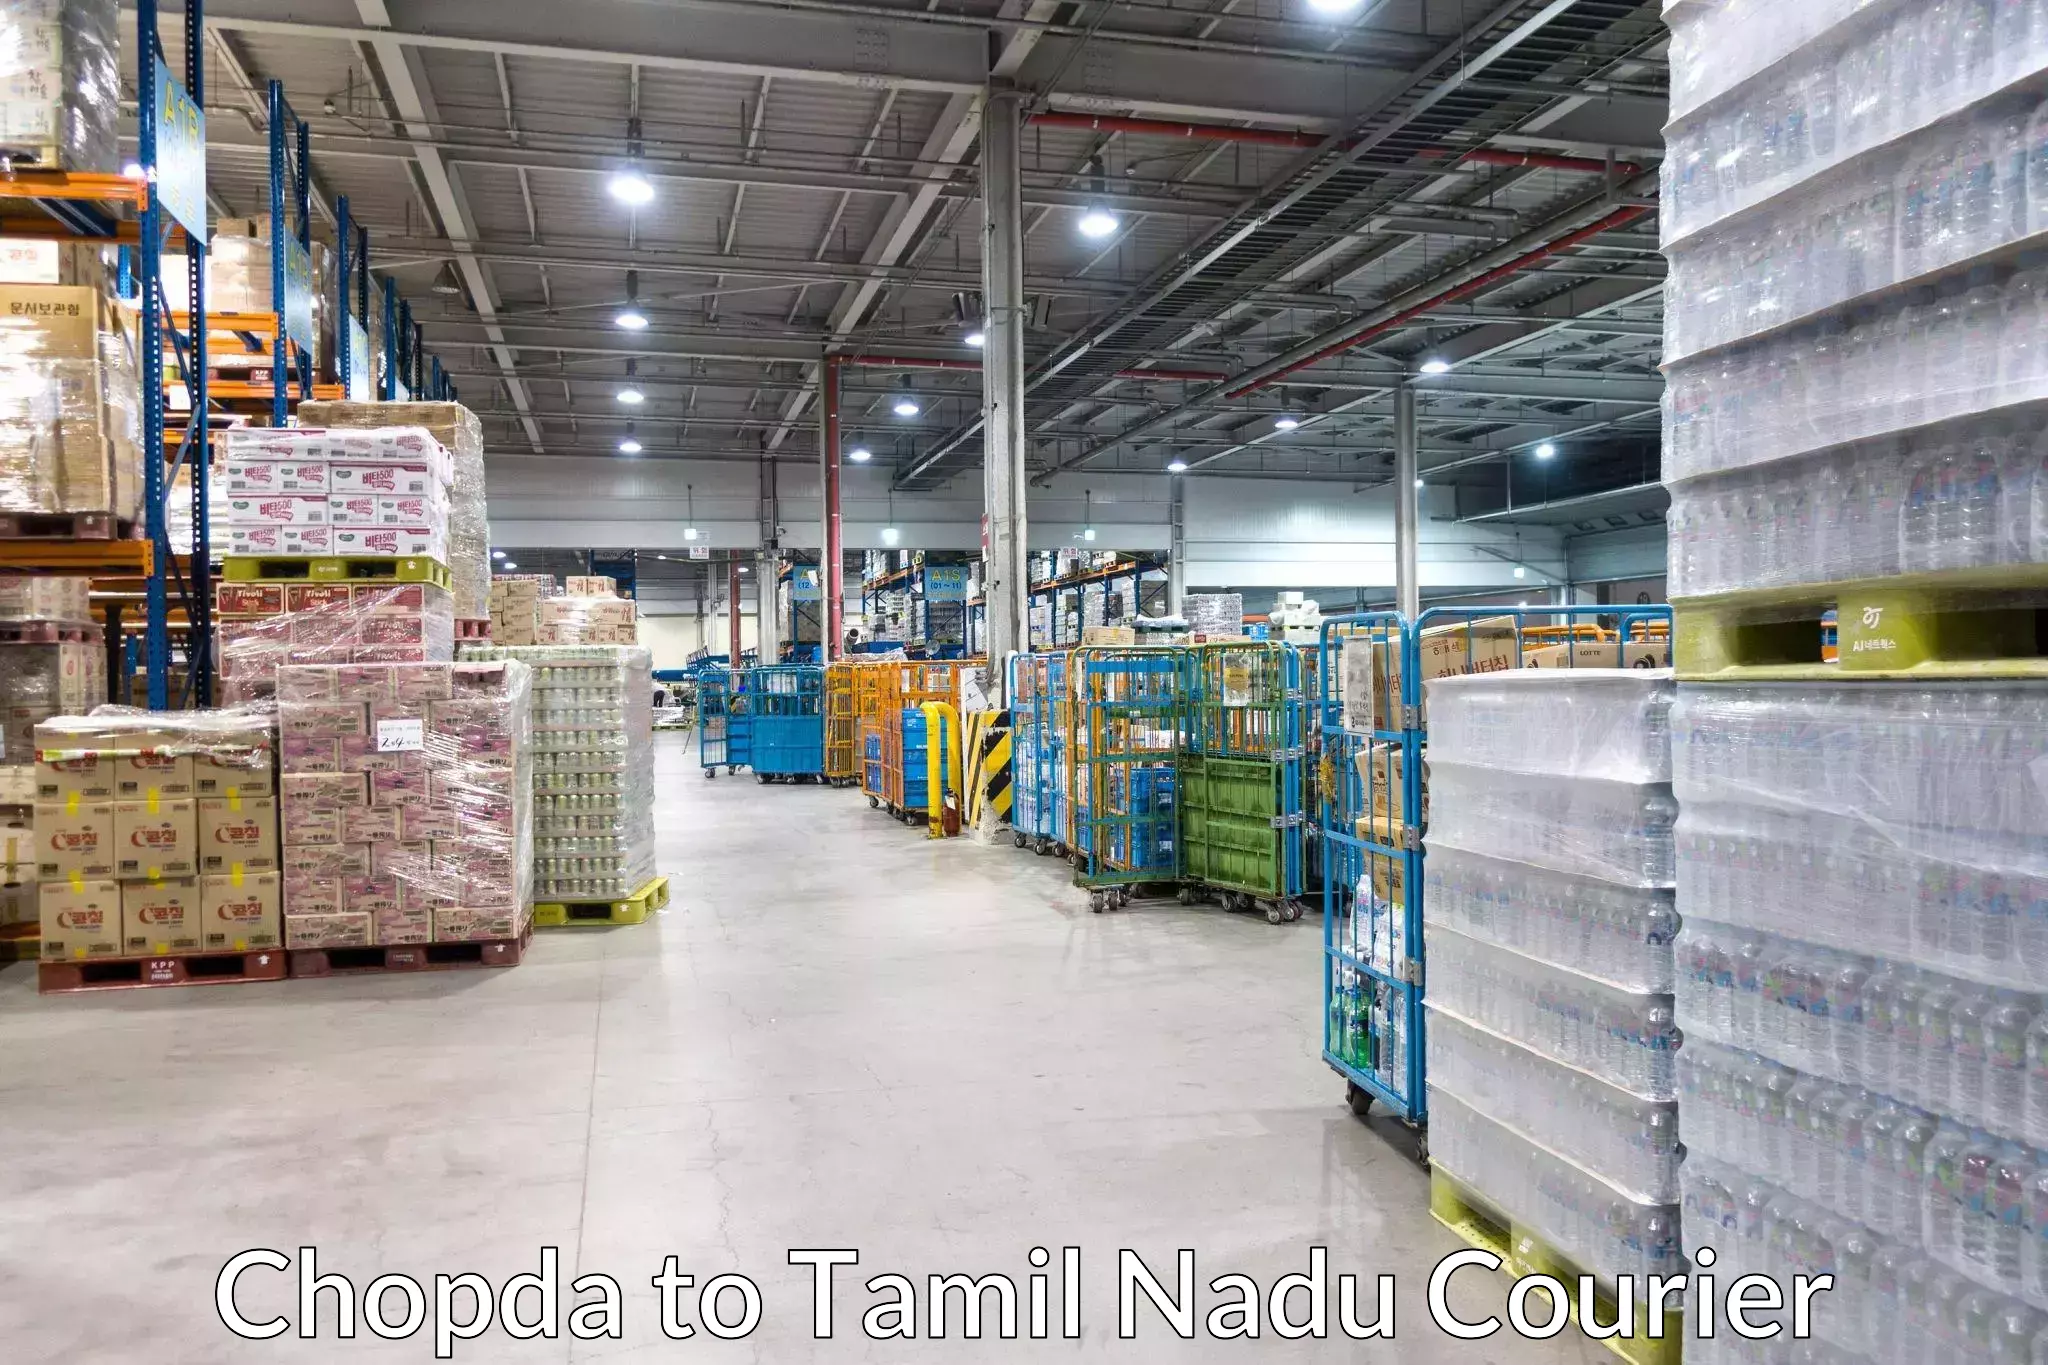 Express delivery capabilities Chopda to Karur